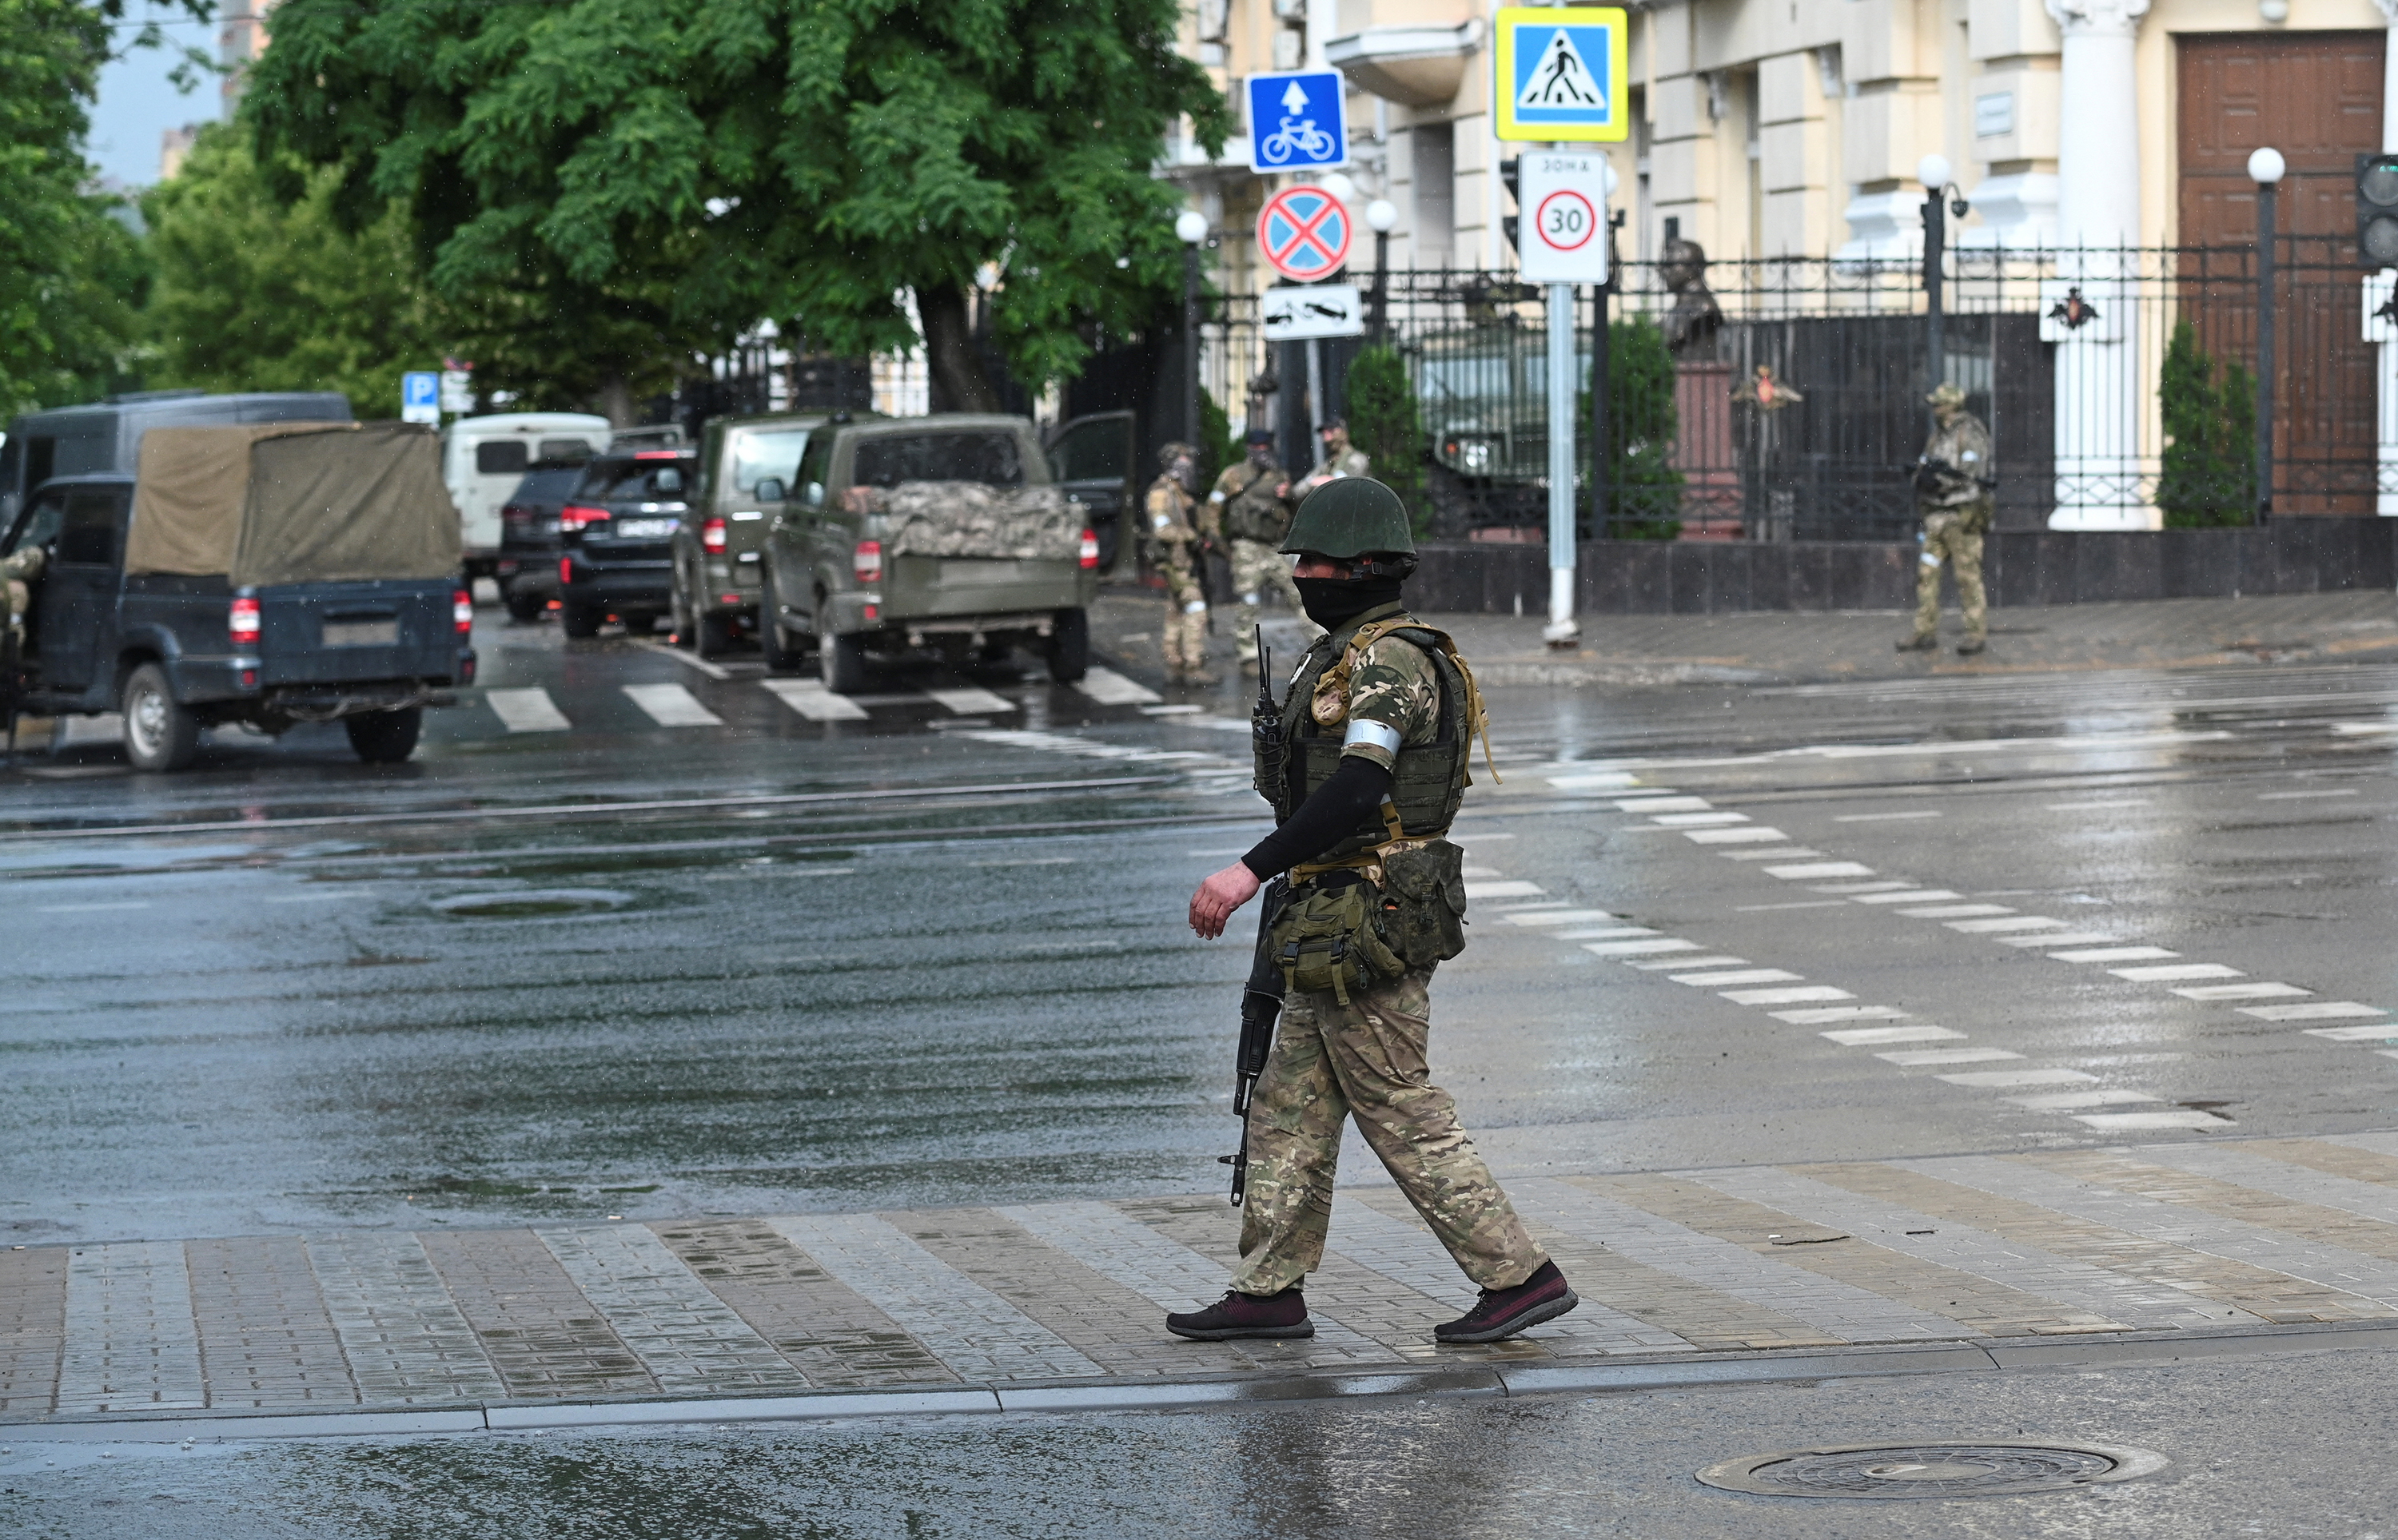 Fighters of Wagner private mercenary group stand guard in a street near the headquarters of the Southern Military District in the city of Rostov-on-Don, Russia, June 24.